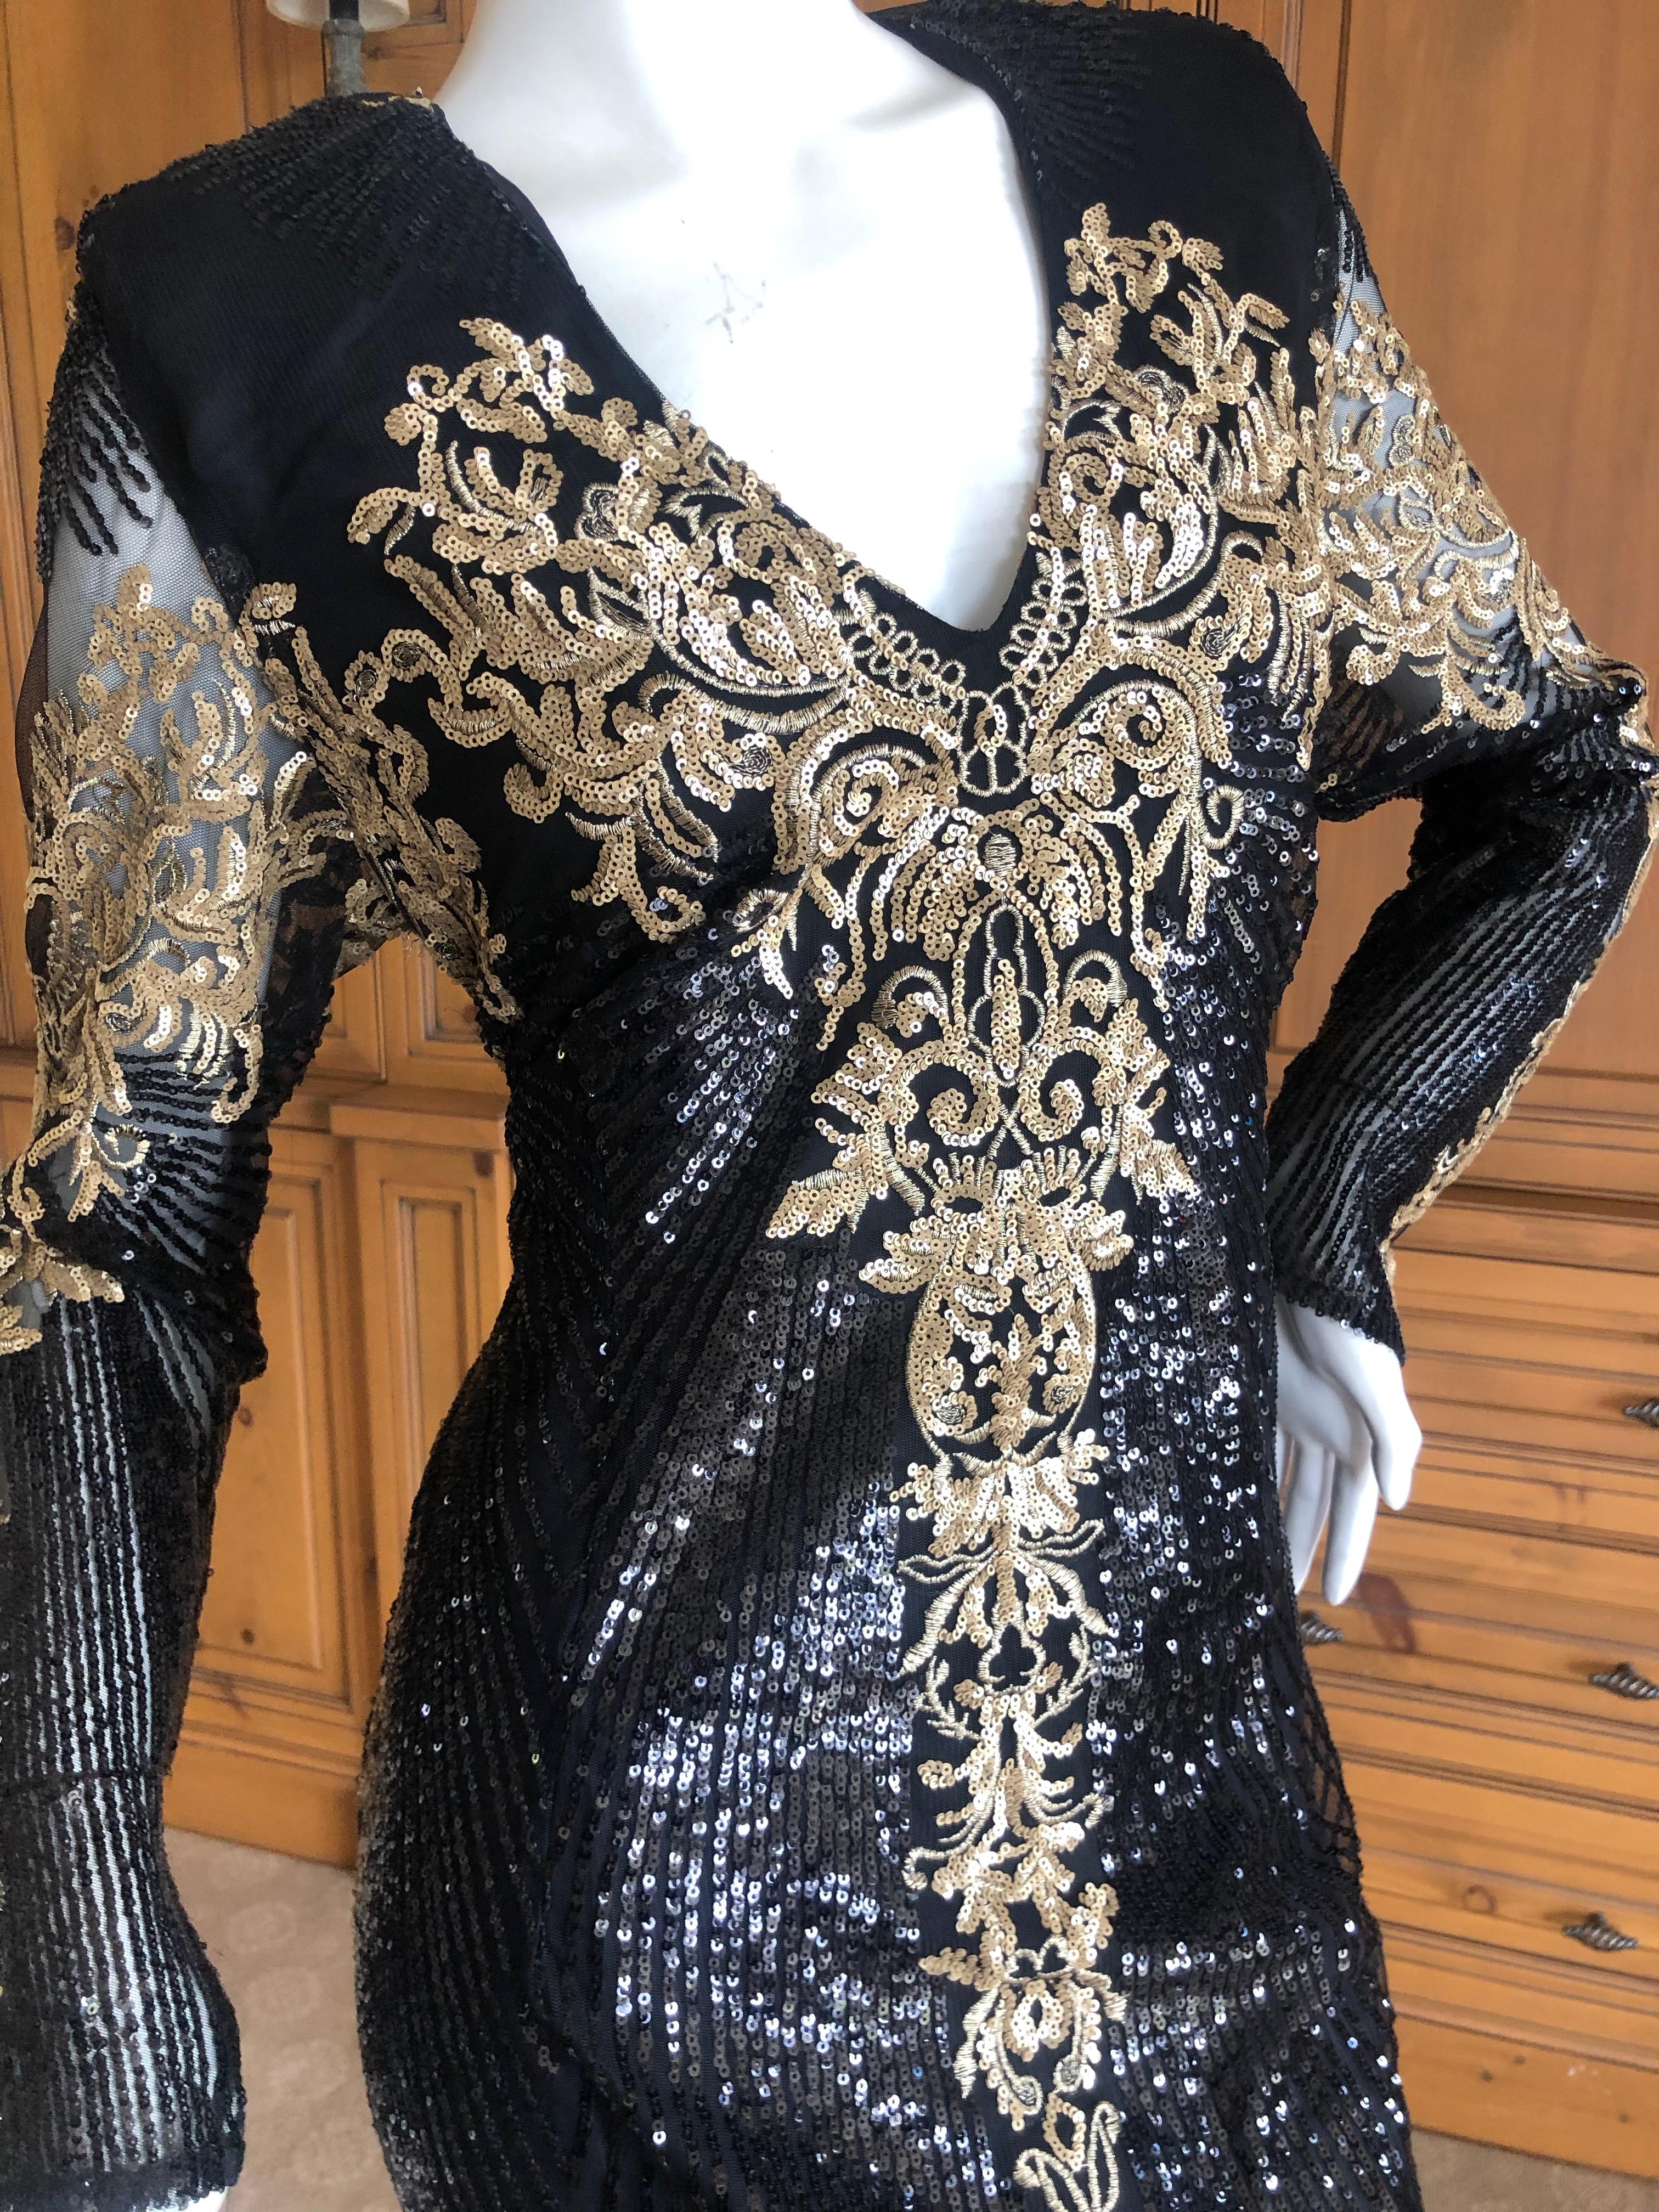 Christian Siriano Exquisitely Embellished Black and Gold Evening Dress w Train L For Sale 3